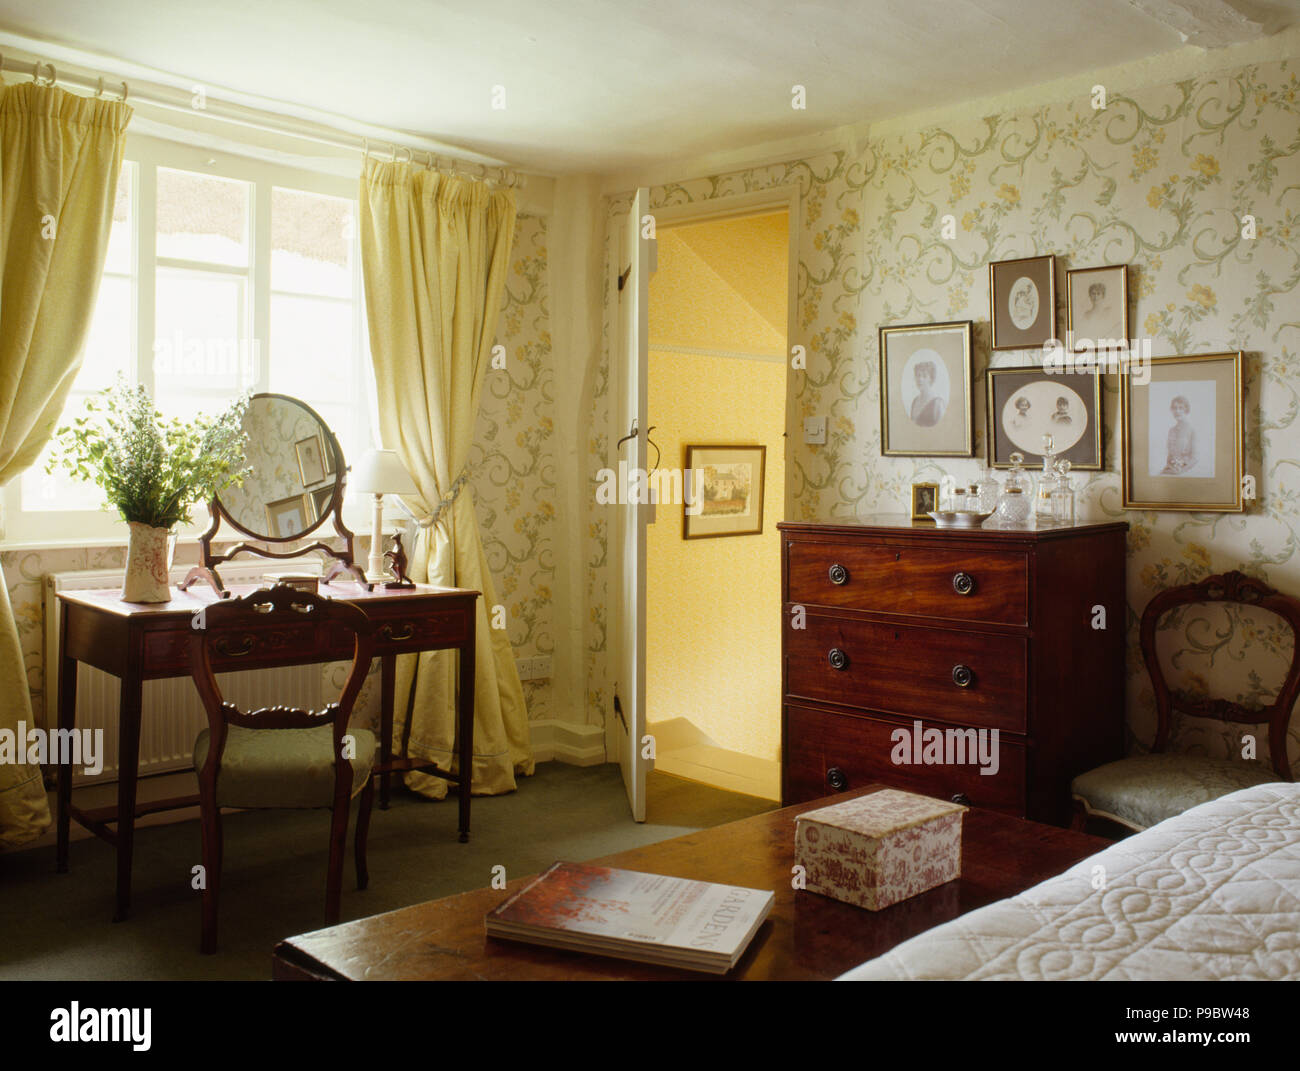 Antique chair and small table in country bedroom with pastel yellow curtains and yellow floral wallpapere Stock Photo